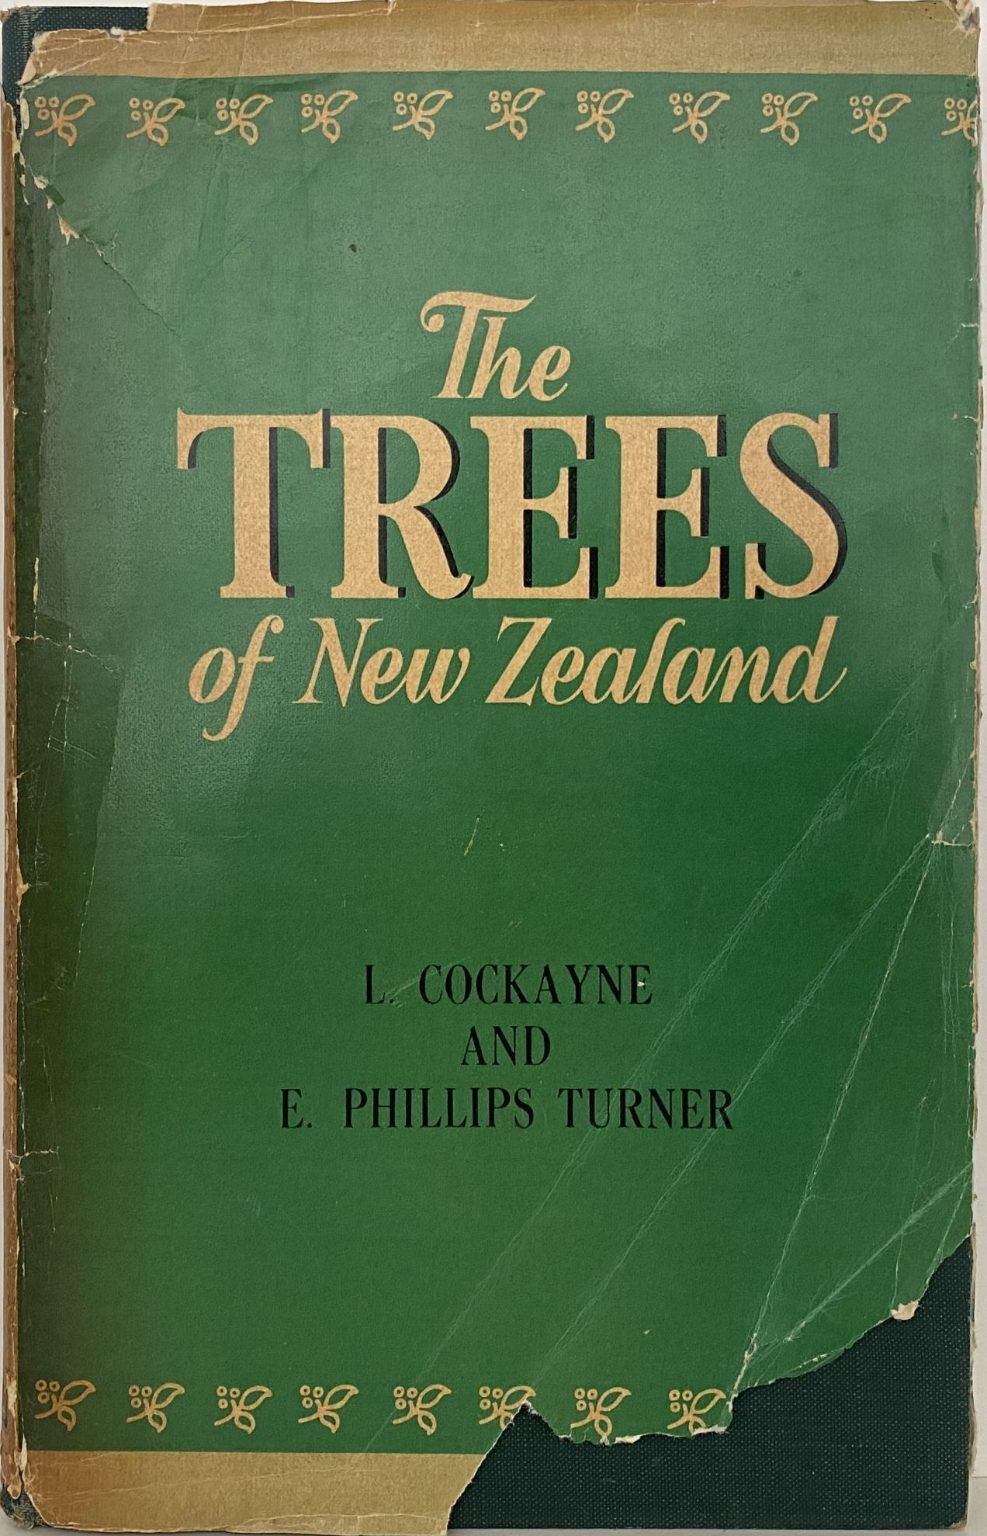 THE TREES of New Zealand